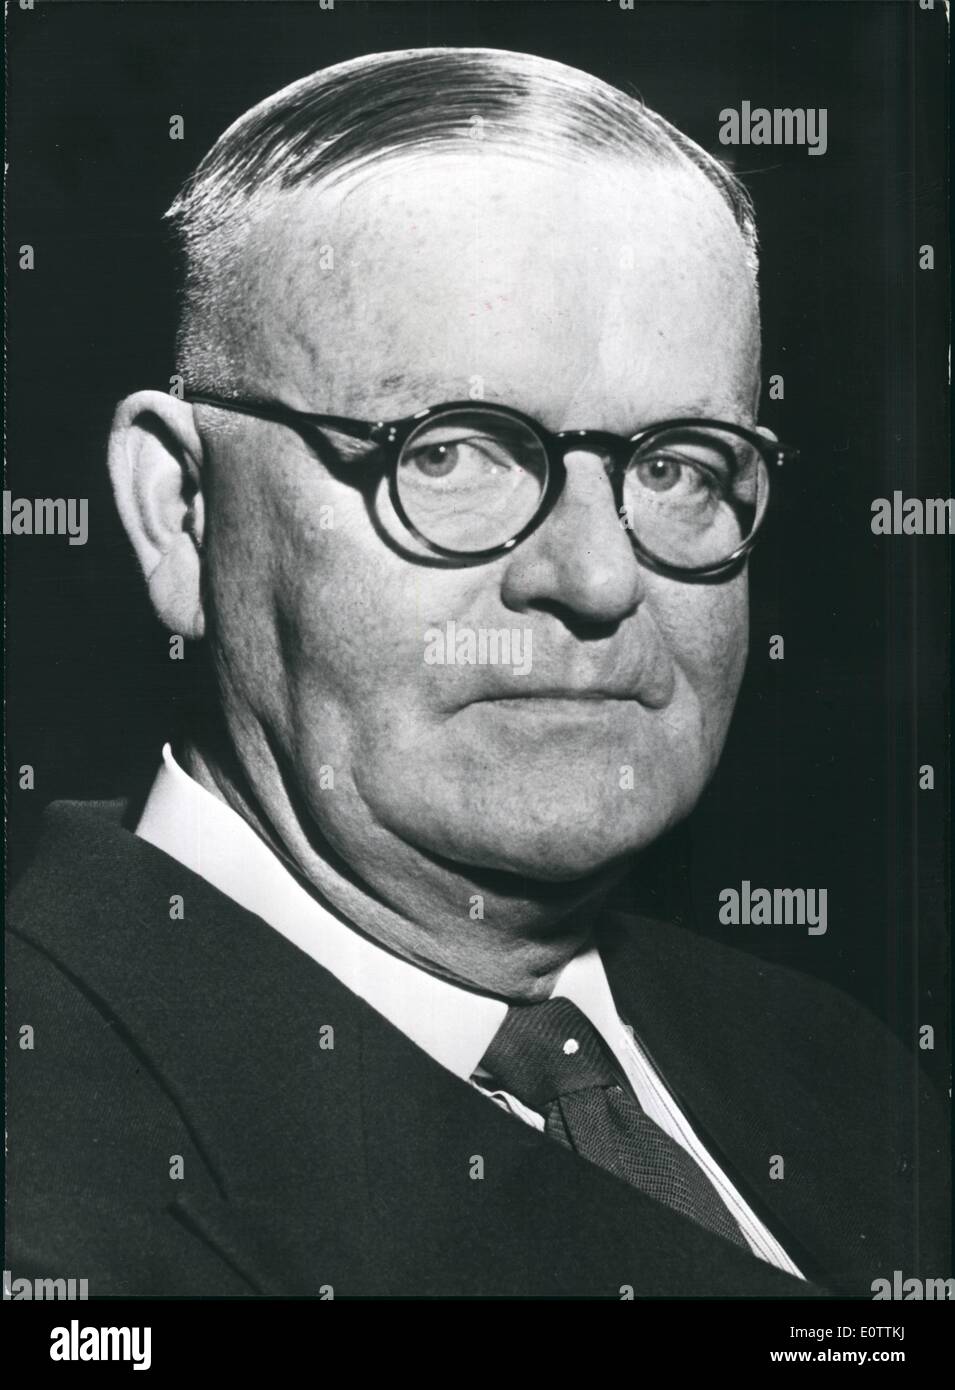 Sep. 09, 1960 - Frederick Boland Elected Chairman of Uno General Assembly Photo shows A recent portrait of Frederick Boland who Stock Photo